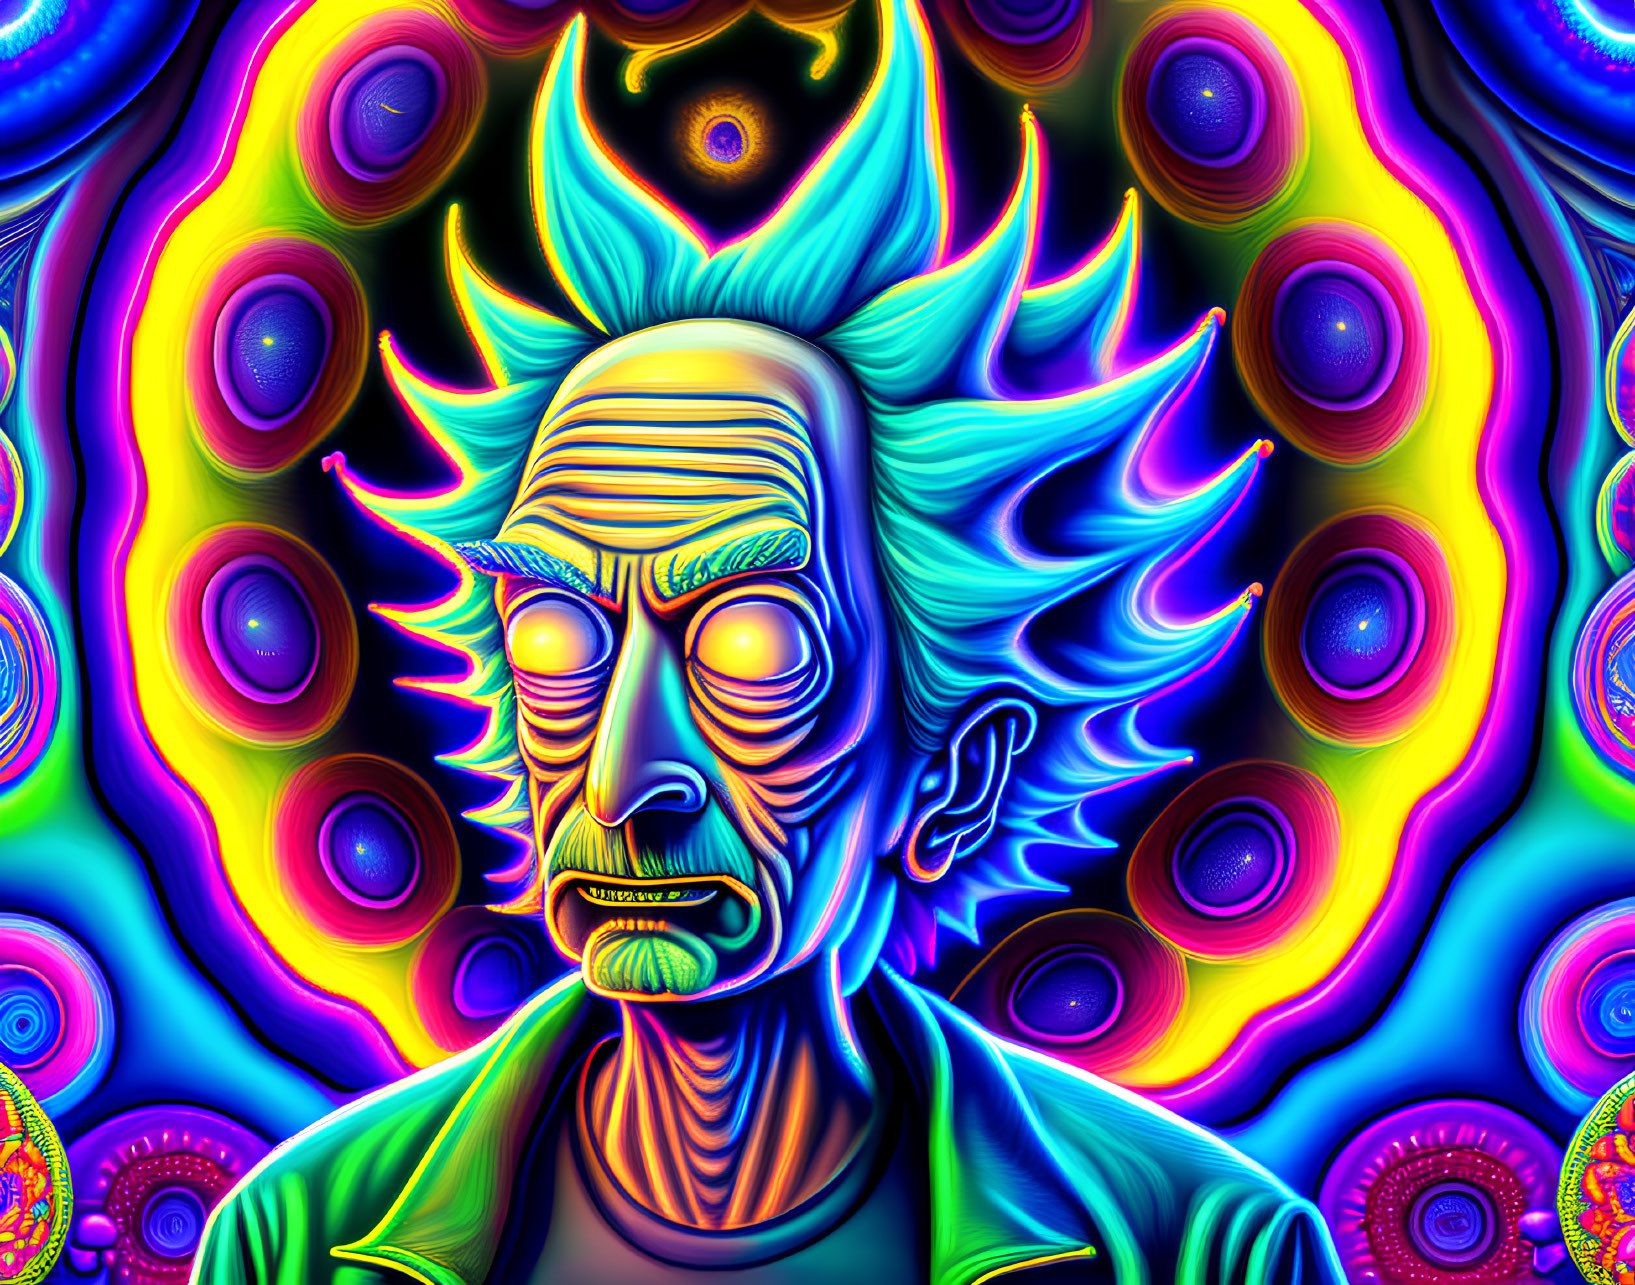 Colorful Psychedelic Artwork: Stylized Man with Exaggerated Features & Kaleidos